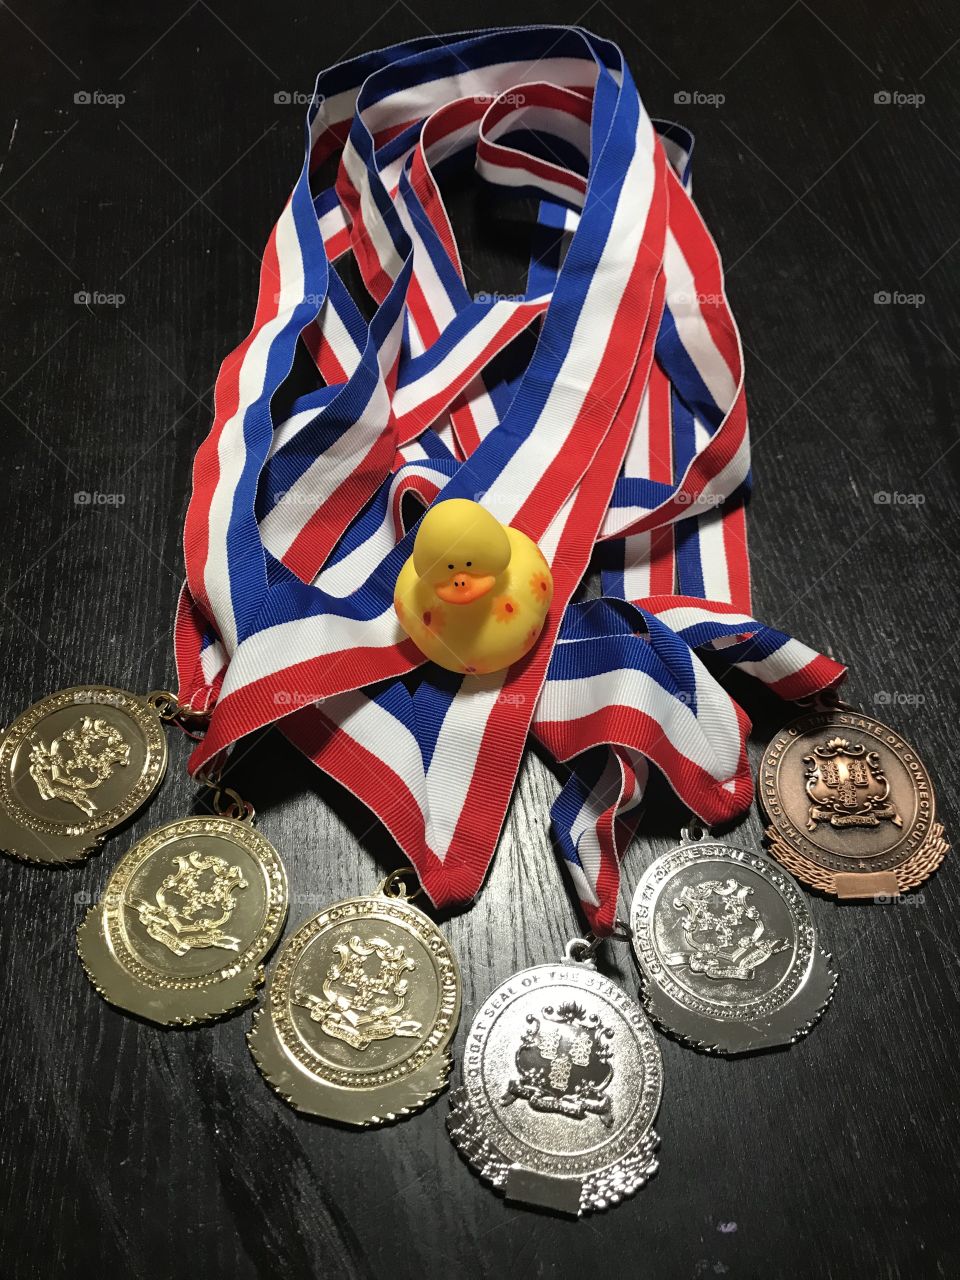 3 gold, 2 silver, 1 bronze... and a duck. Connecticut Master’s Games awards for swimming. 